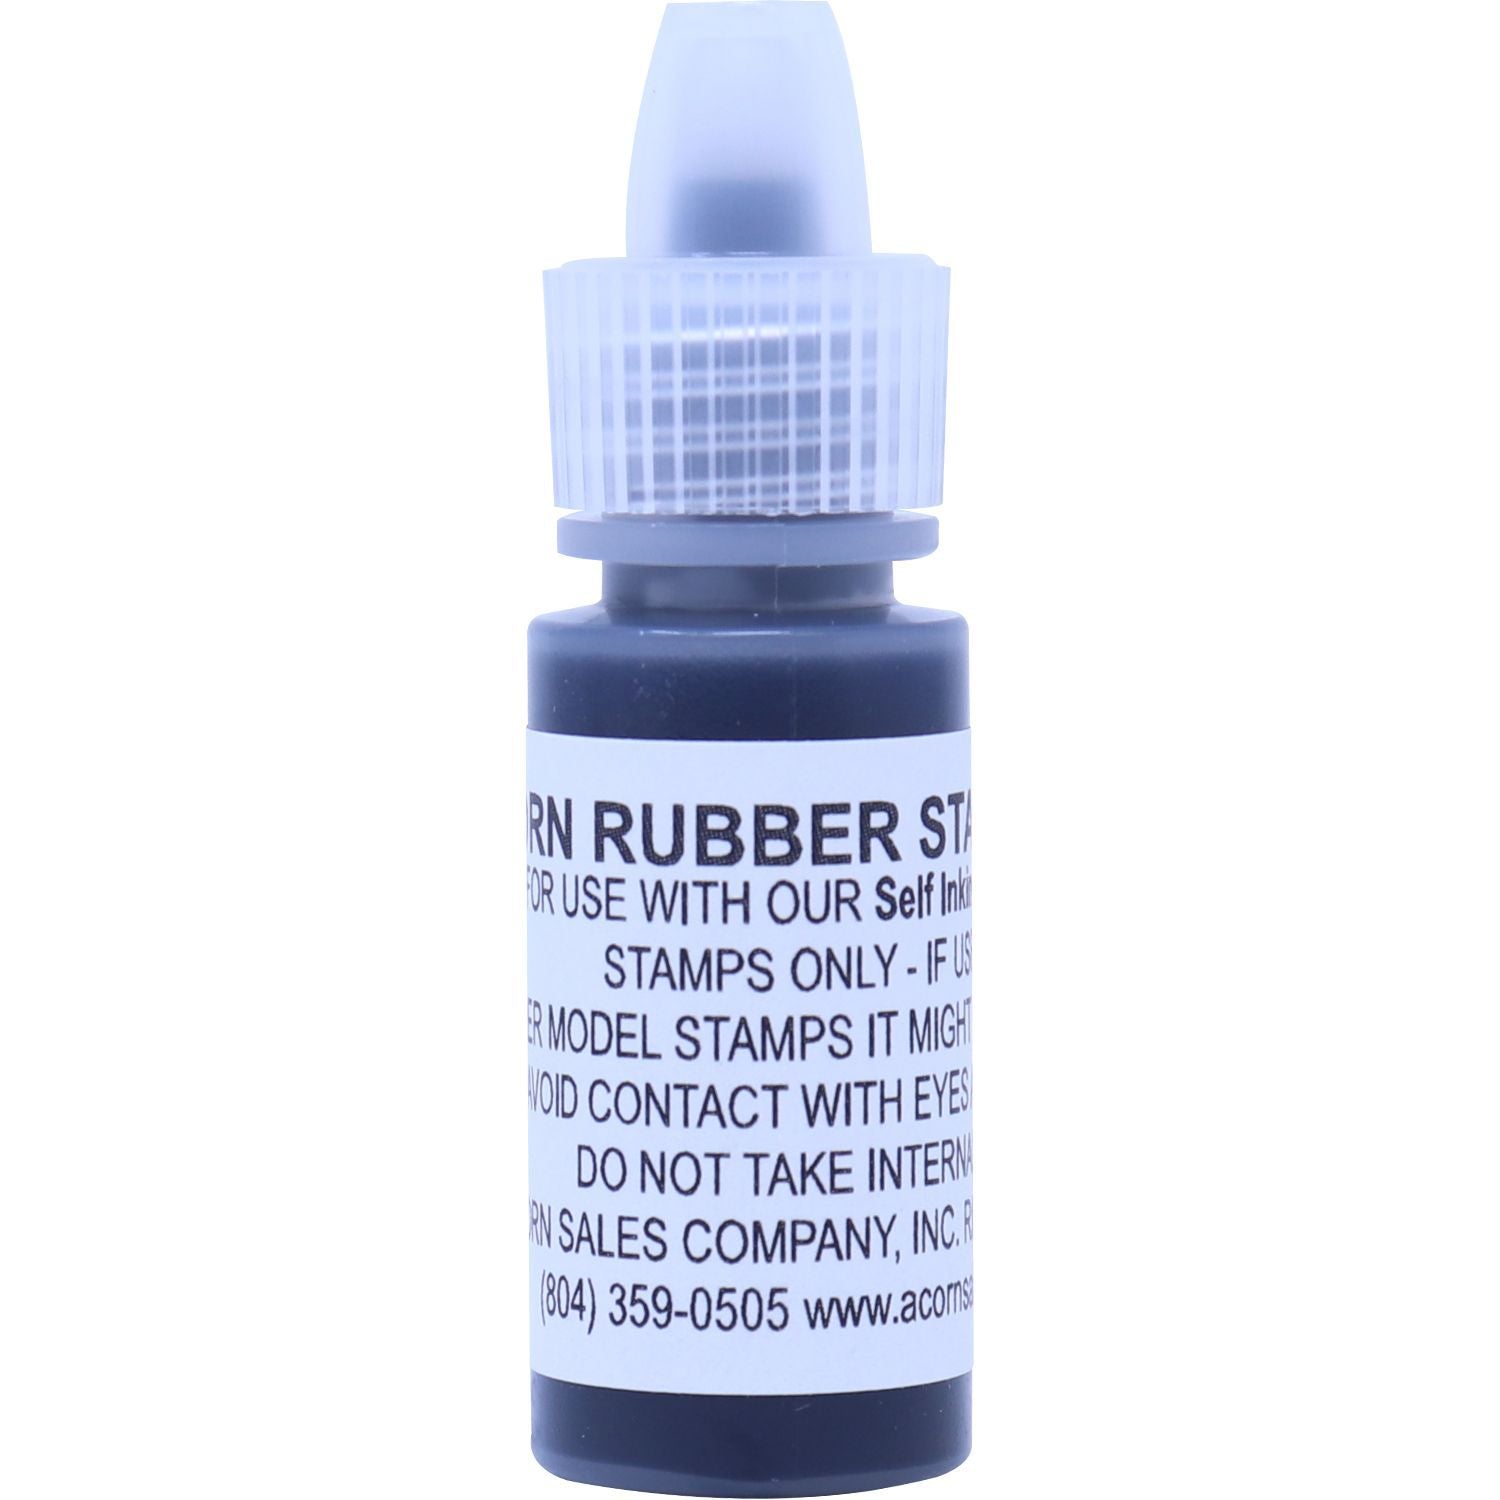 Rubber Stamp Ink, Ink For Self Inking Stamps